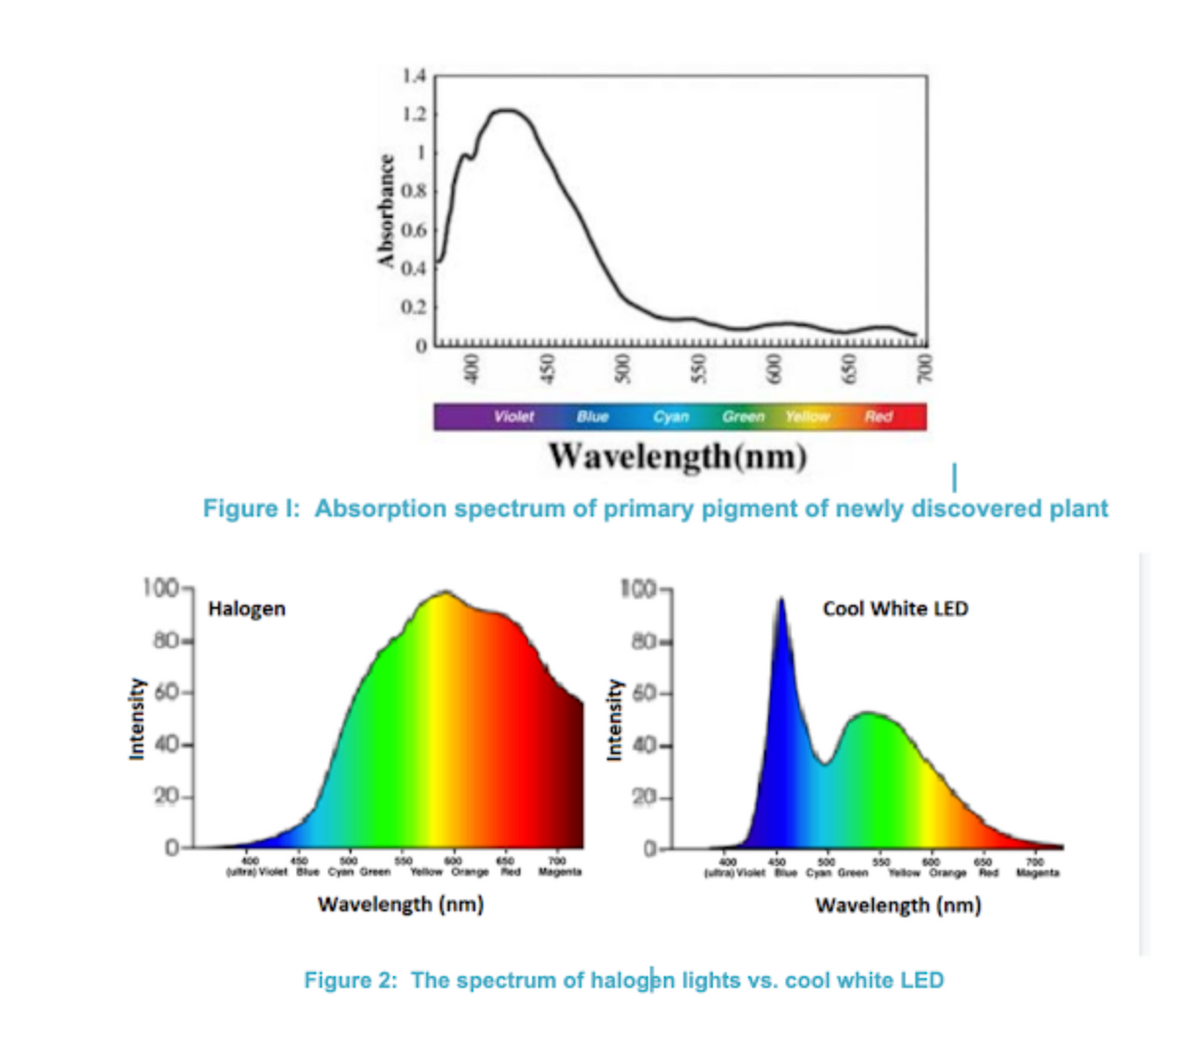 14
1.2
0.8
0.6
04
0.2
Violet
Blue
Cyan
Green Yellow
Red
Wavelength(nm)
Figure I: Absorption spectrum of primary pigment of newly discovered plant
100,
Halogen
1007
Cool White LED
80-
80-
60-
60-
40-
20
20-
0-
550
700
ra Violet Blue Cyan Green
Yellow OrangeRed
Magenta
ra Violete Cyan GreenTlow Orange Red Maganta
Wavelength (nm)
Wavelength (nm)
Figure 2: The spectrum of halogen lights vs. cool white LED
Intensity
Absorbance
450
Intensity
009
09
00L
